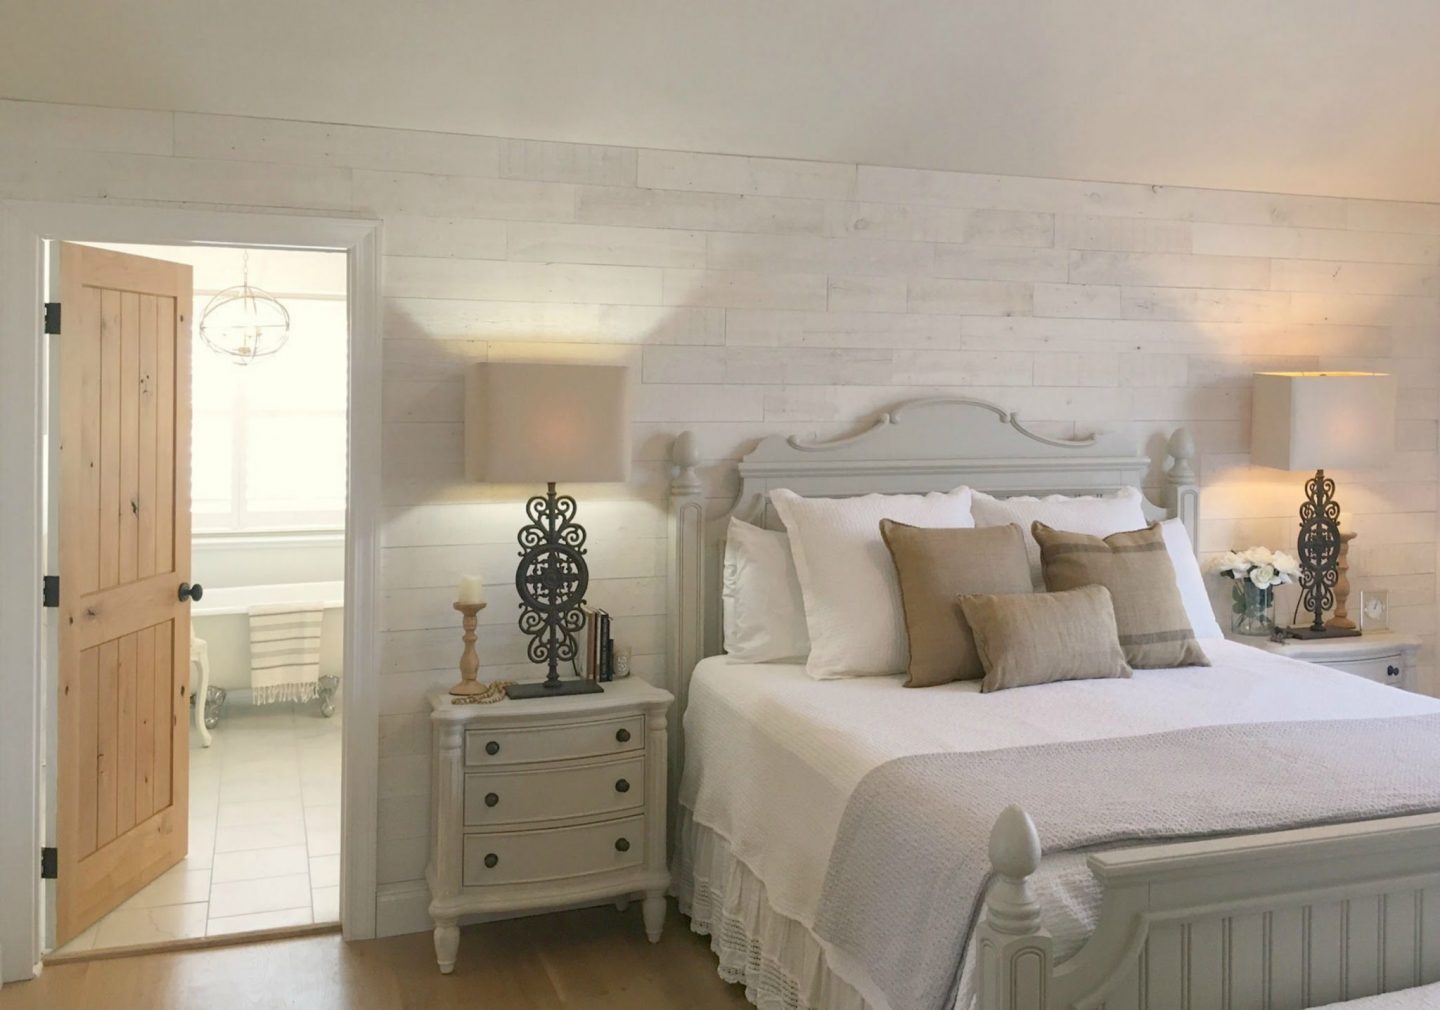 My serene white bedroom with Stikwood (Hamptons) statement wall, cottage style furniture, knotty alder door with oiled bronze hardware, and white oak wide plank hardwood flooring. #hellolovelystudio #bedroom #serene #whitebedroom #frenchcountry #rusticdecor #modernfarmhouse #stikwood #hamptons